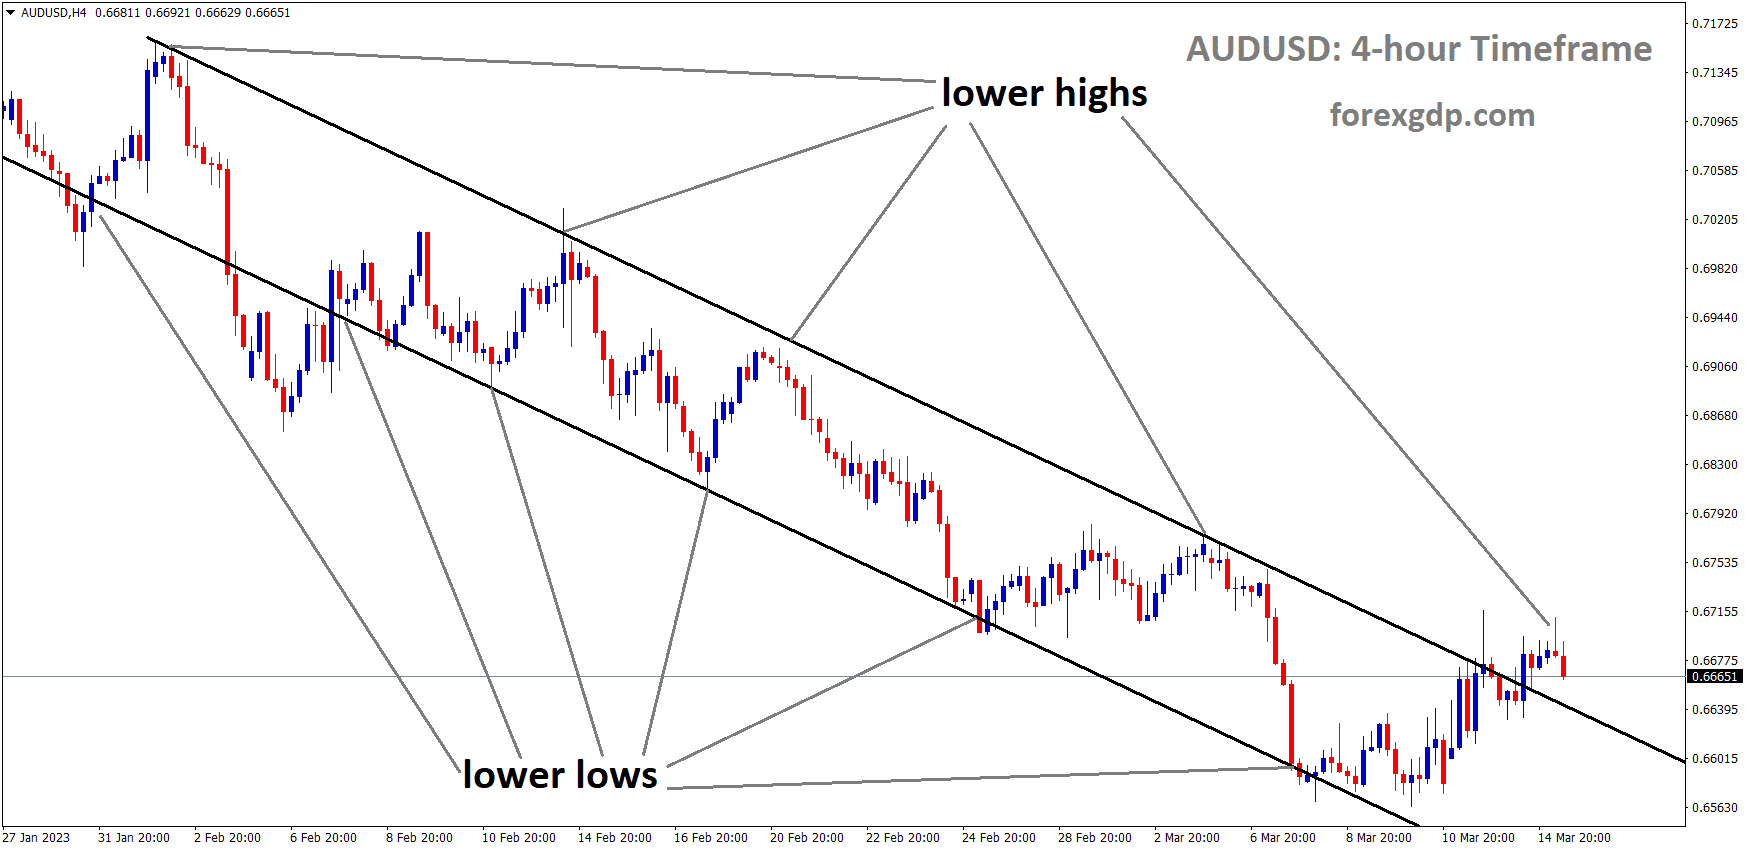 AUDUSD is moving in the Descending channel and the market has reached the lower high area of the channel 1